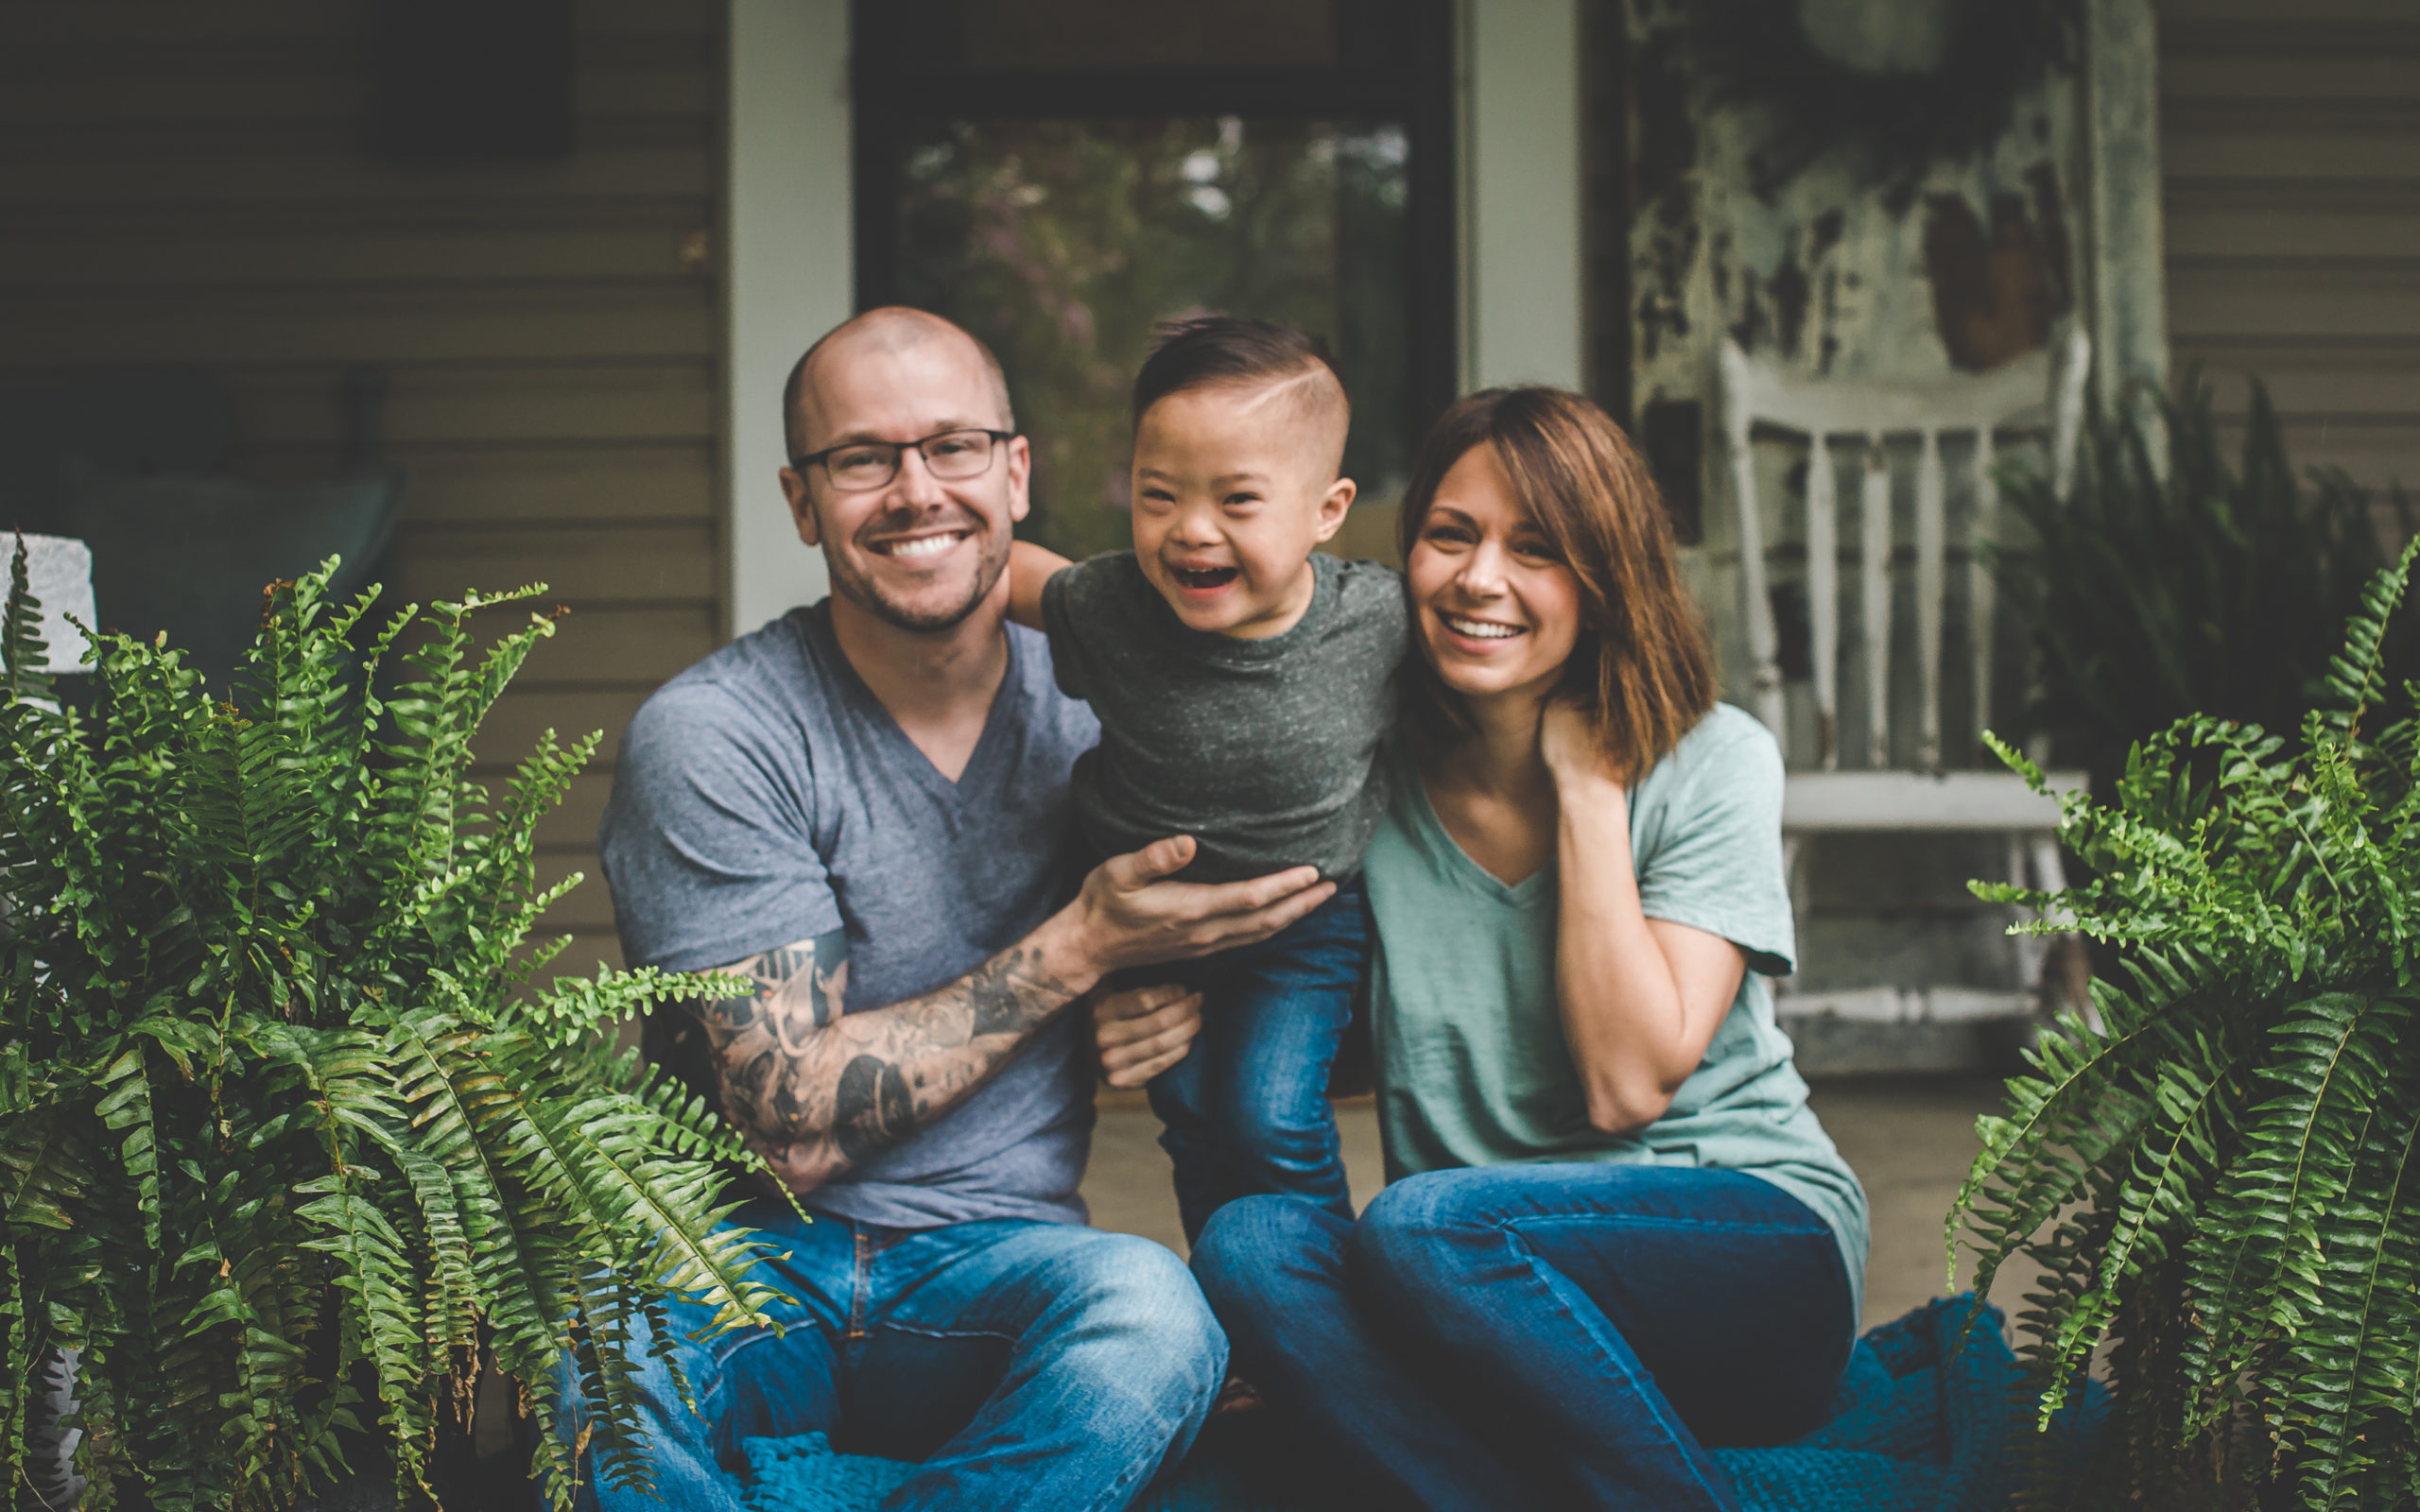 Dad and mom sitting on front porch steps with son adopted from China